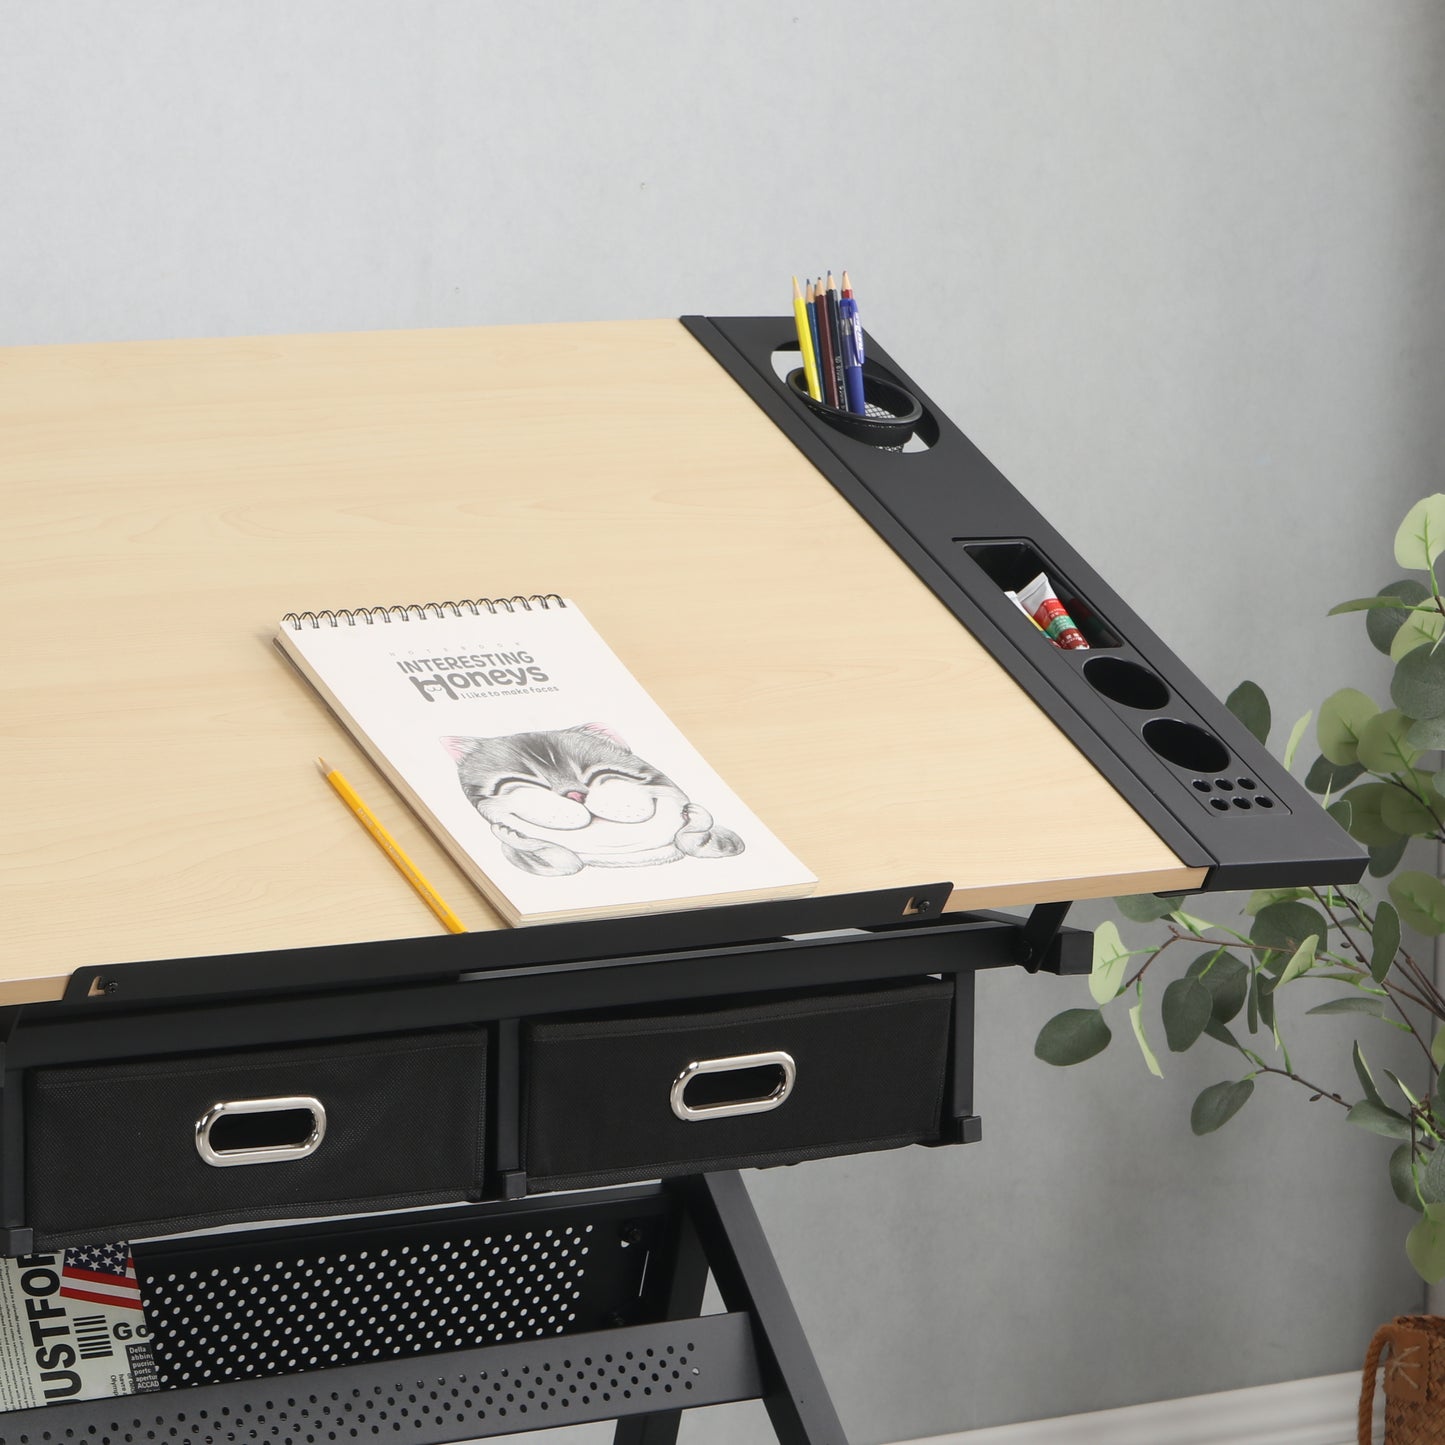 Adjustable drawing drafting table desk, 2 drawers for office